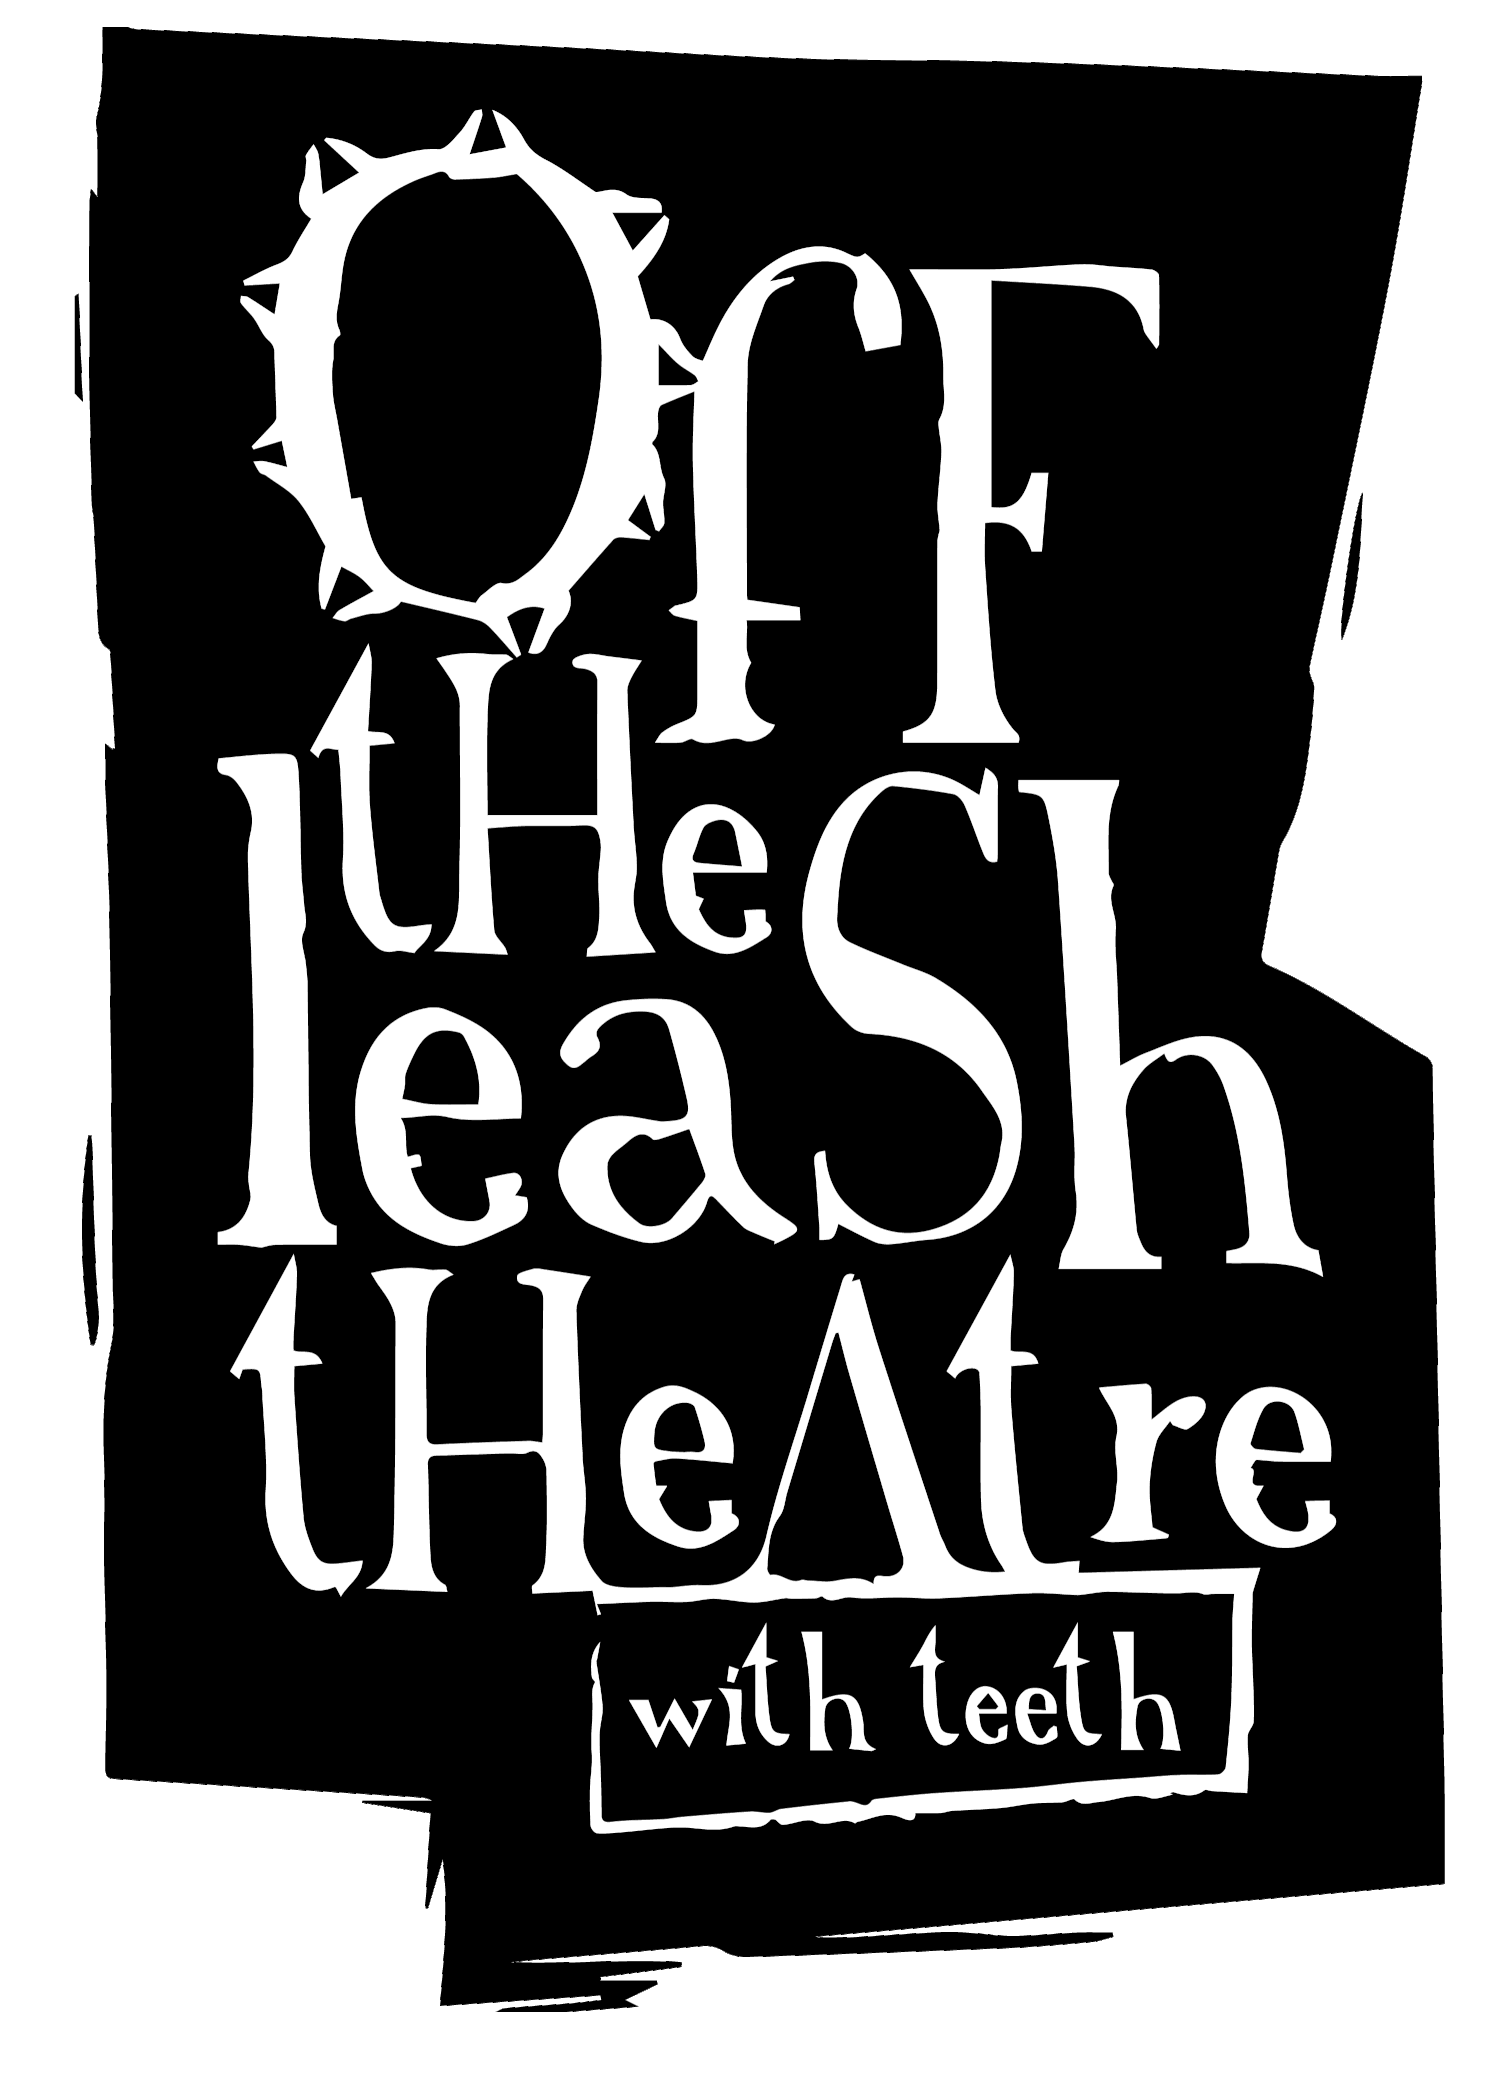 Off The Leash Theatre With Teeth